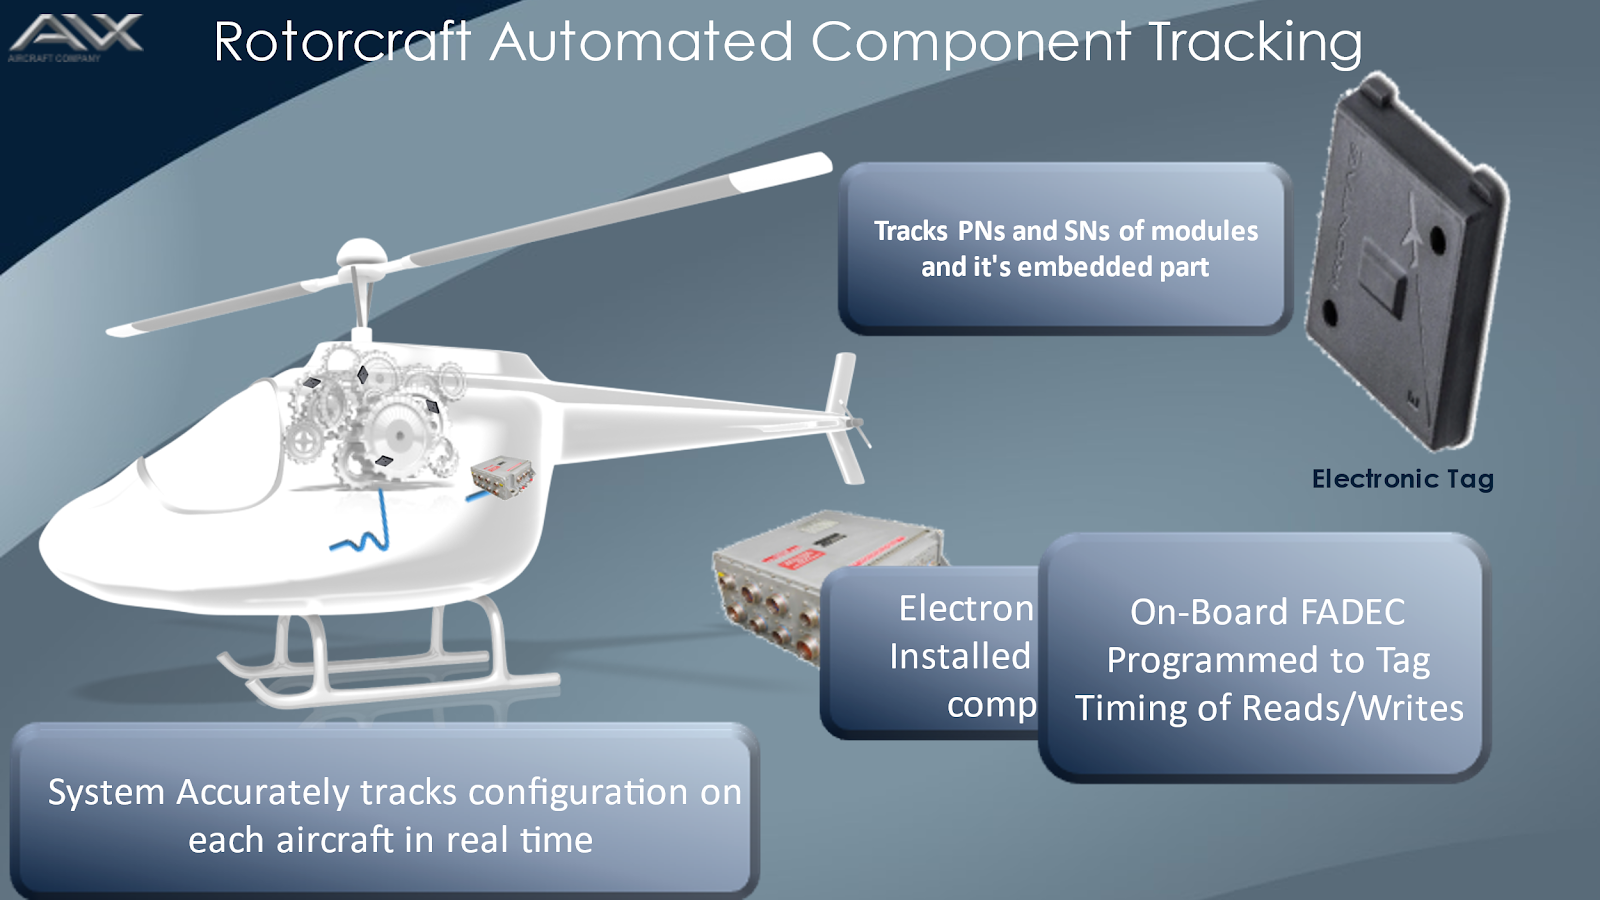 Rotorcraft Automated Component Tracking